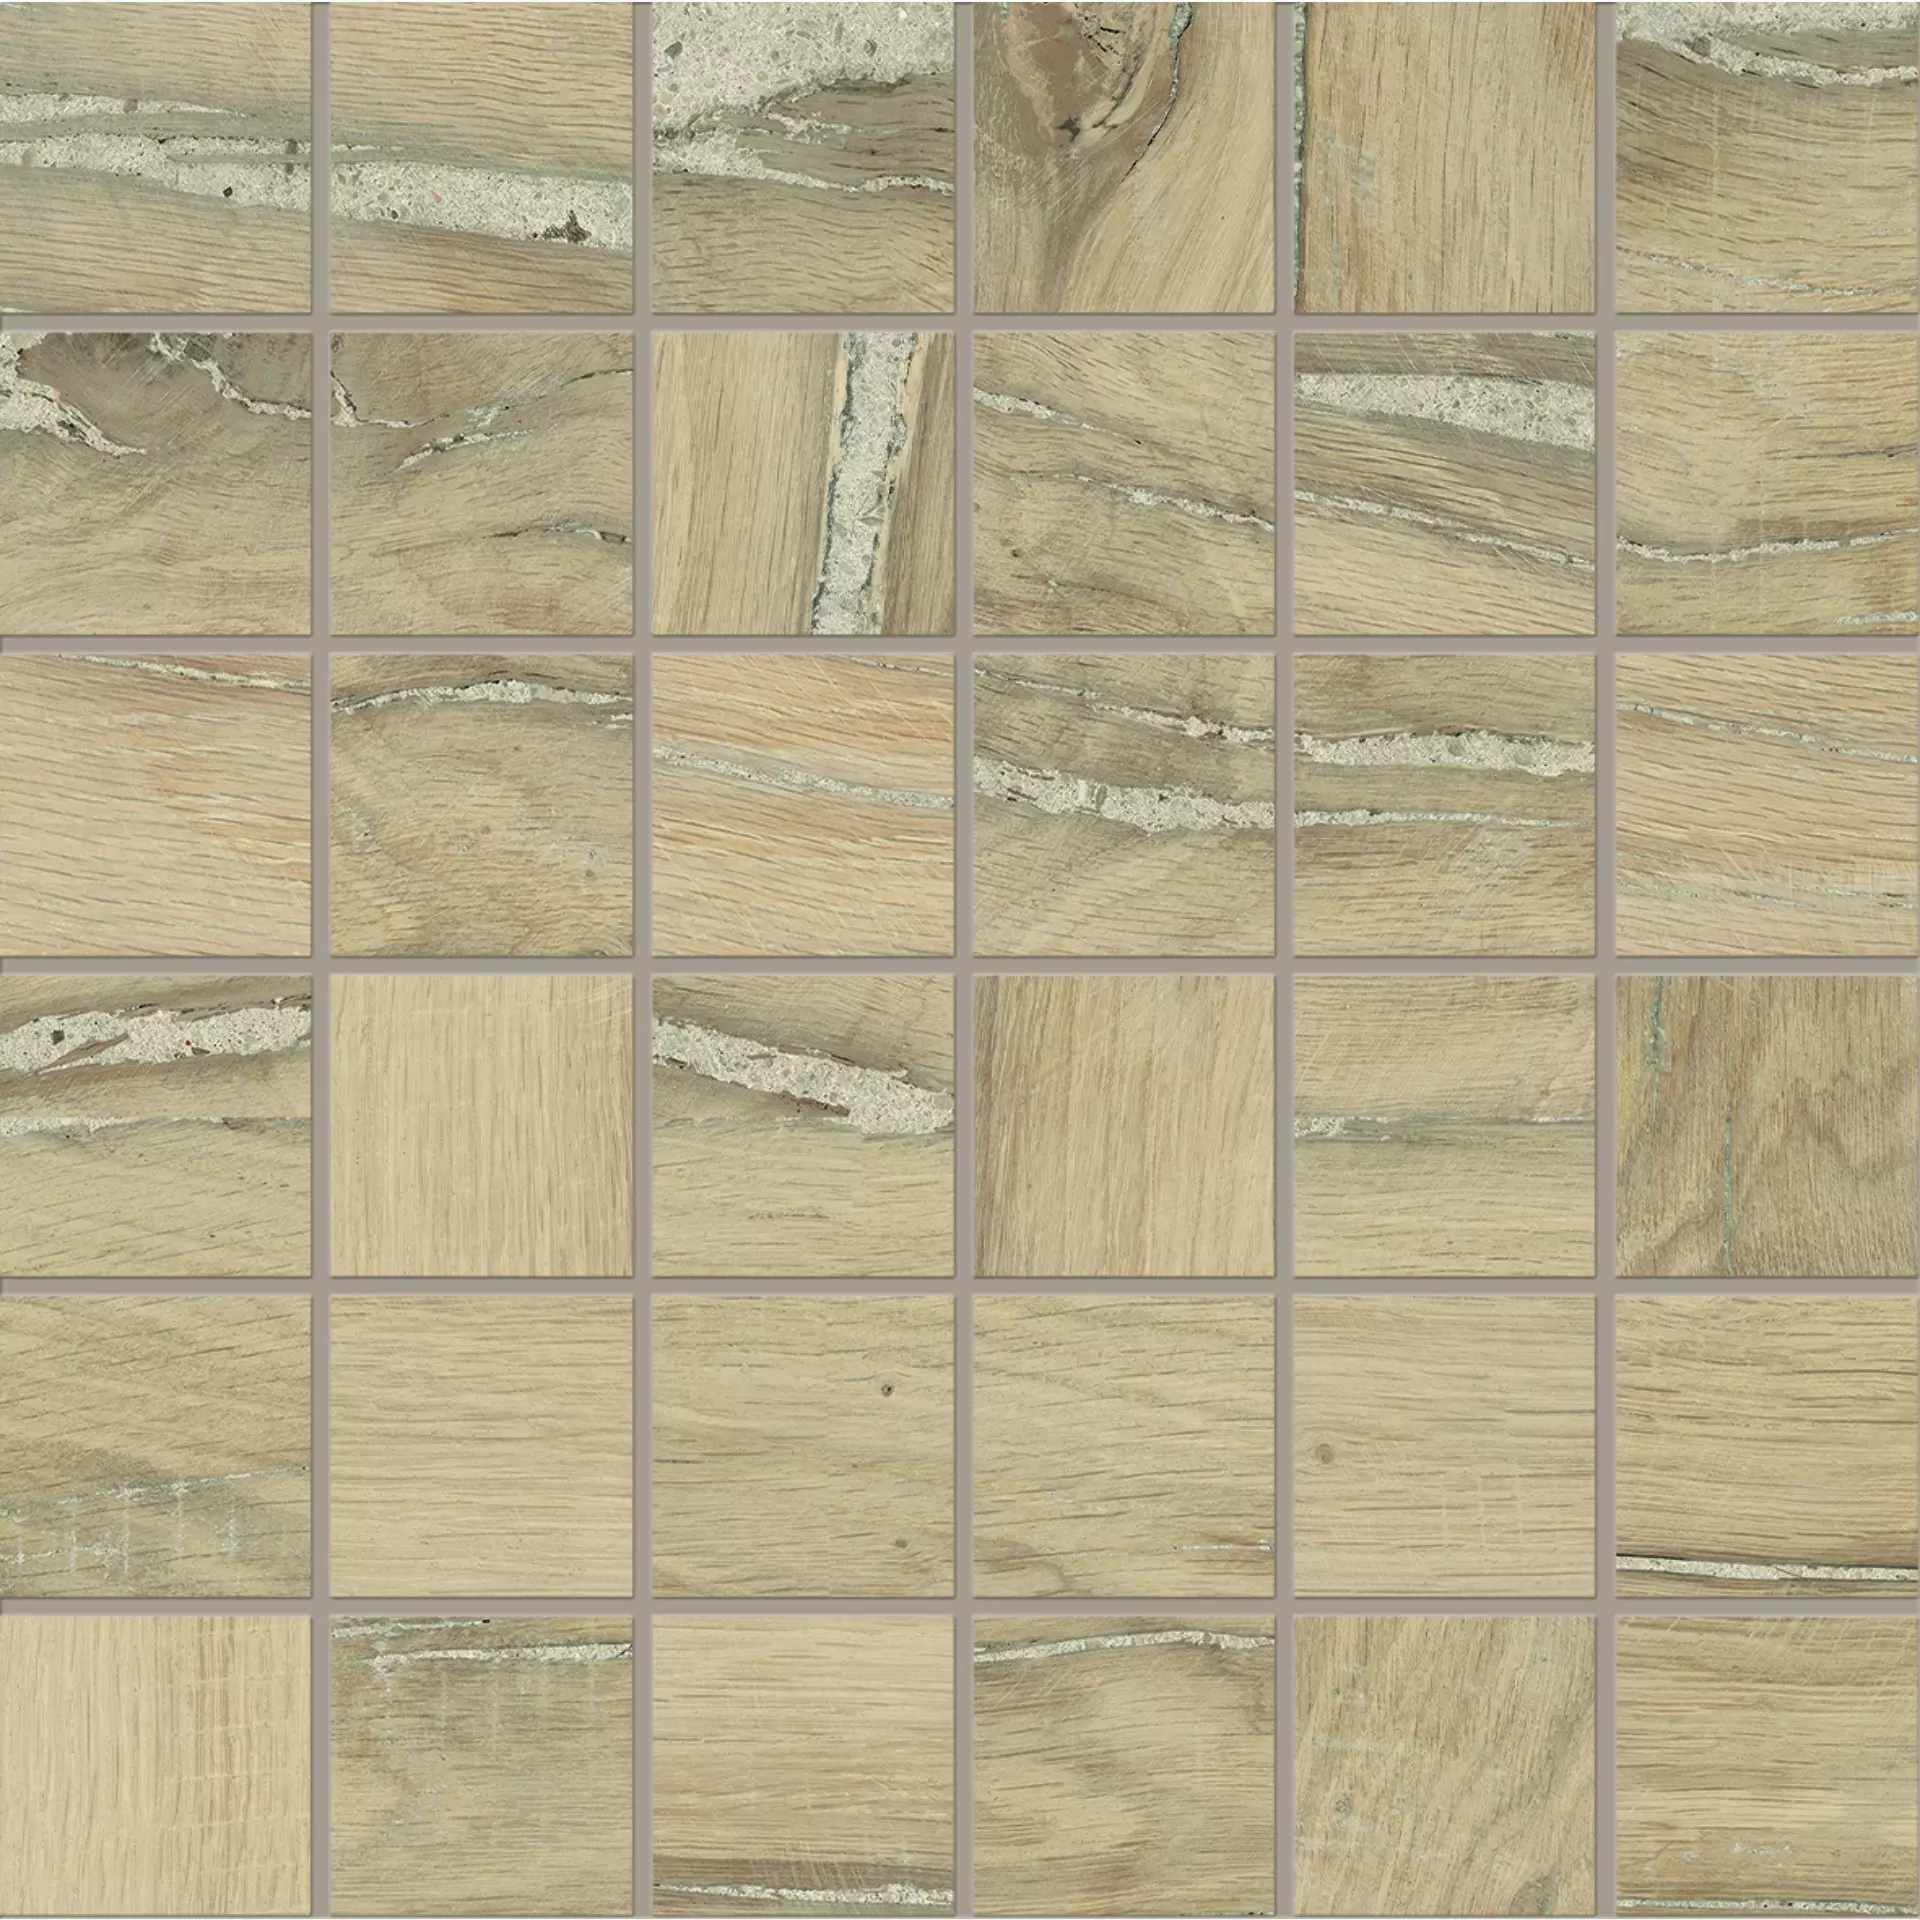 Provenza Alter Miele Naturale Mosaic 5x5 EGYV 30x30cm 9,5mm